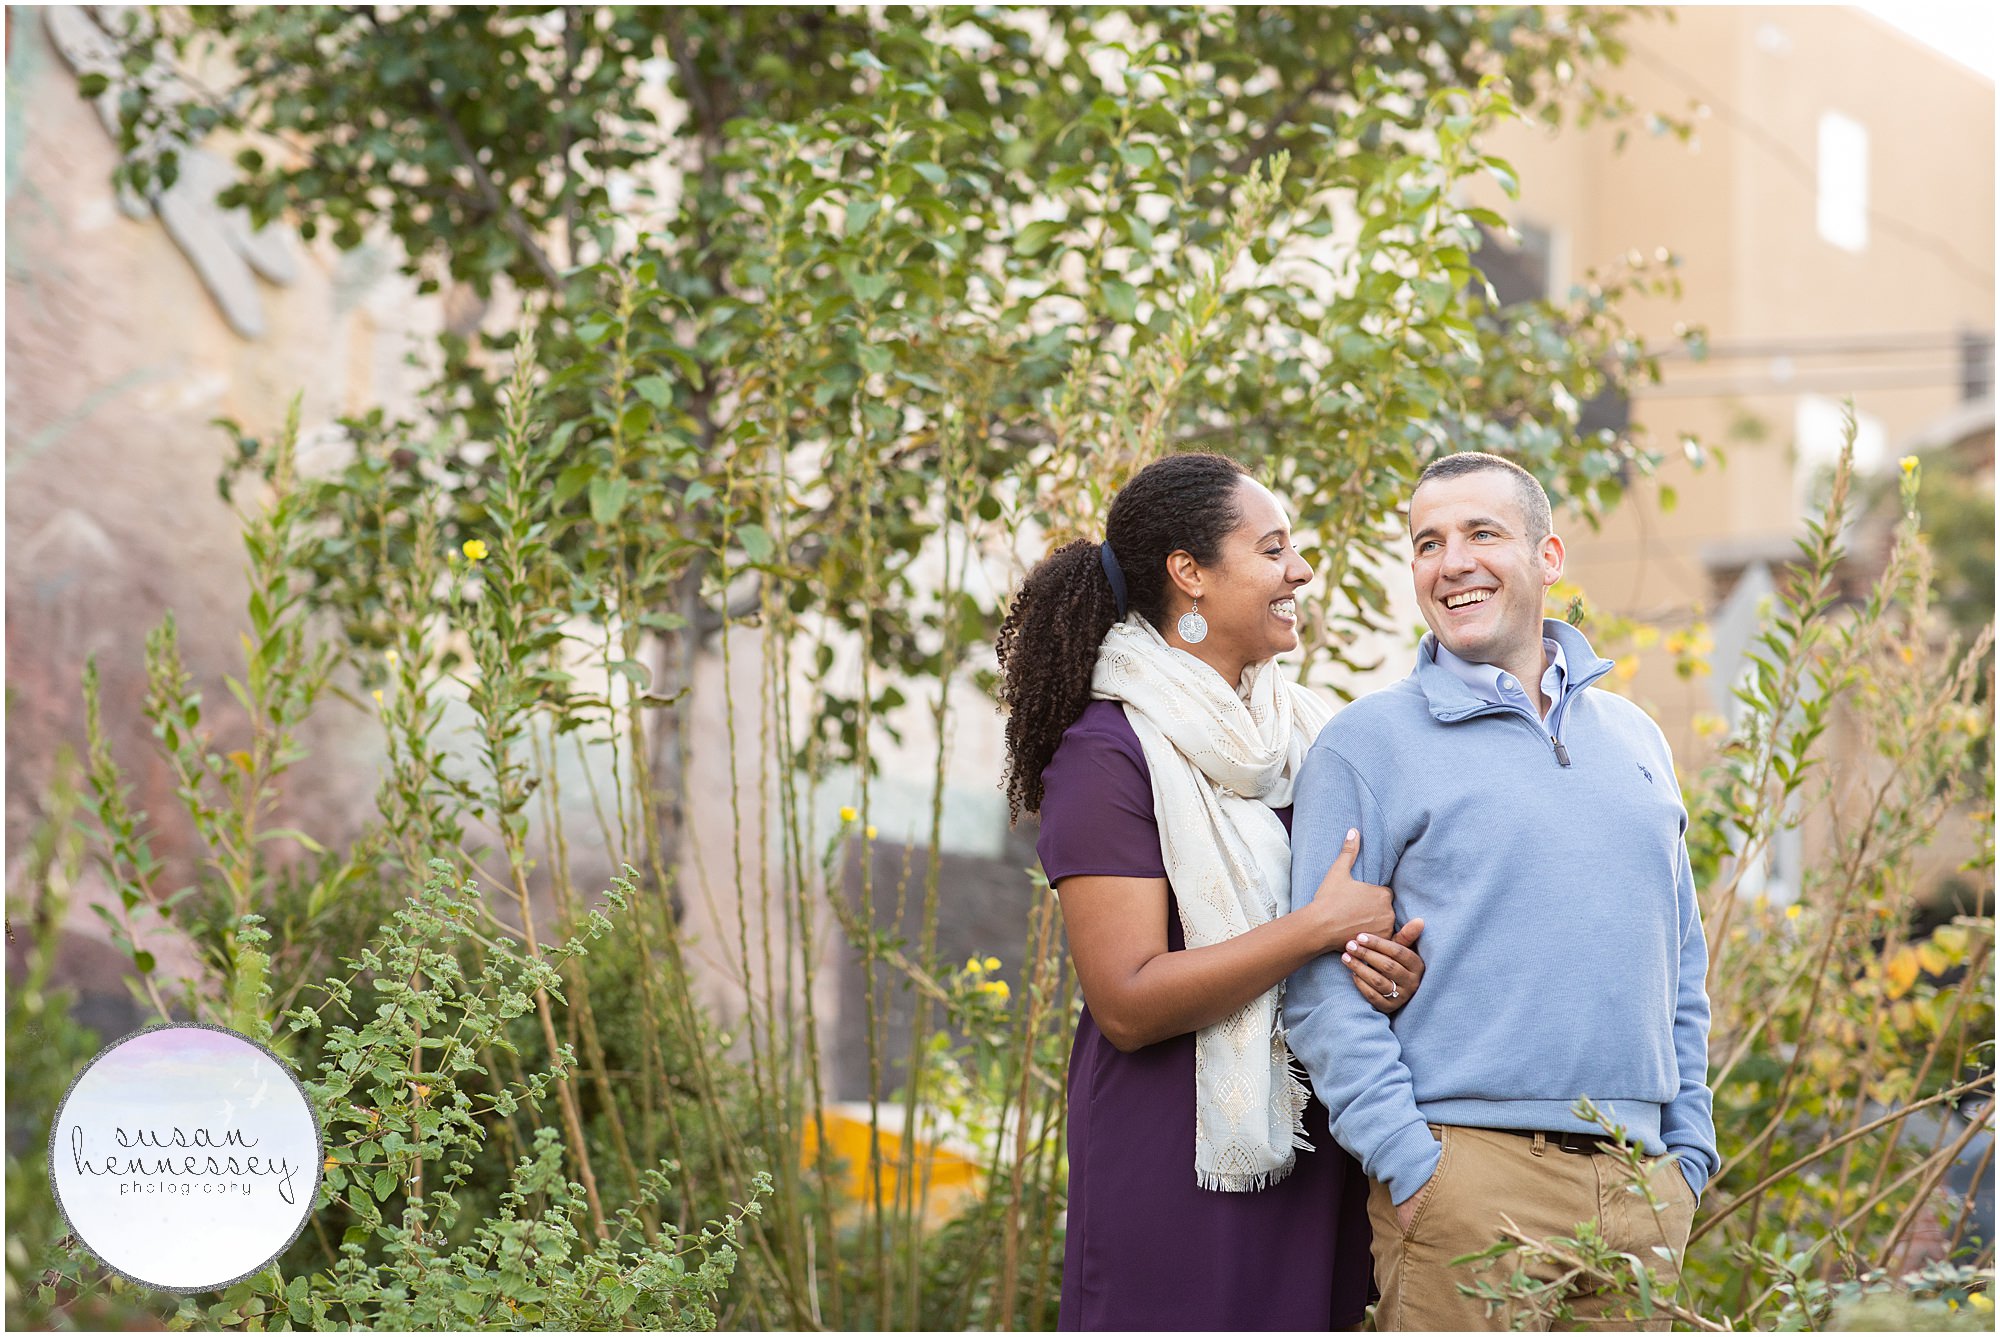 A Northern Liberties Engagement Session by Philadelphia photographer, Susan Hennessey